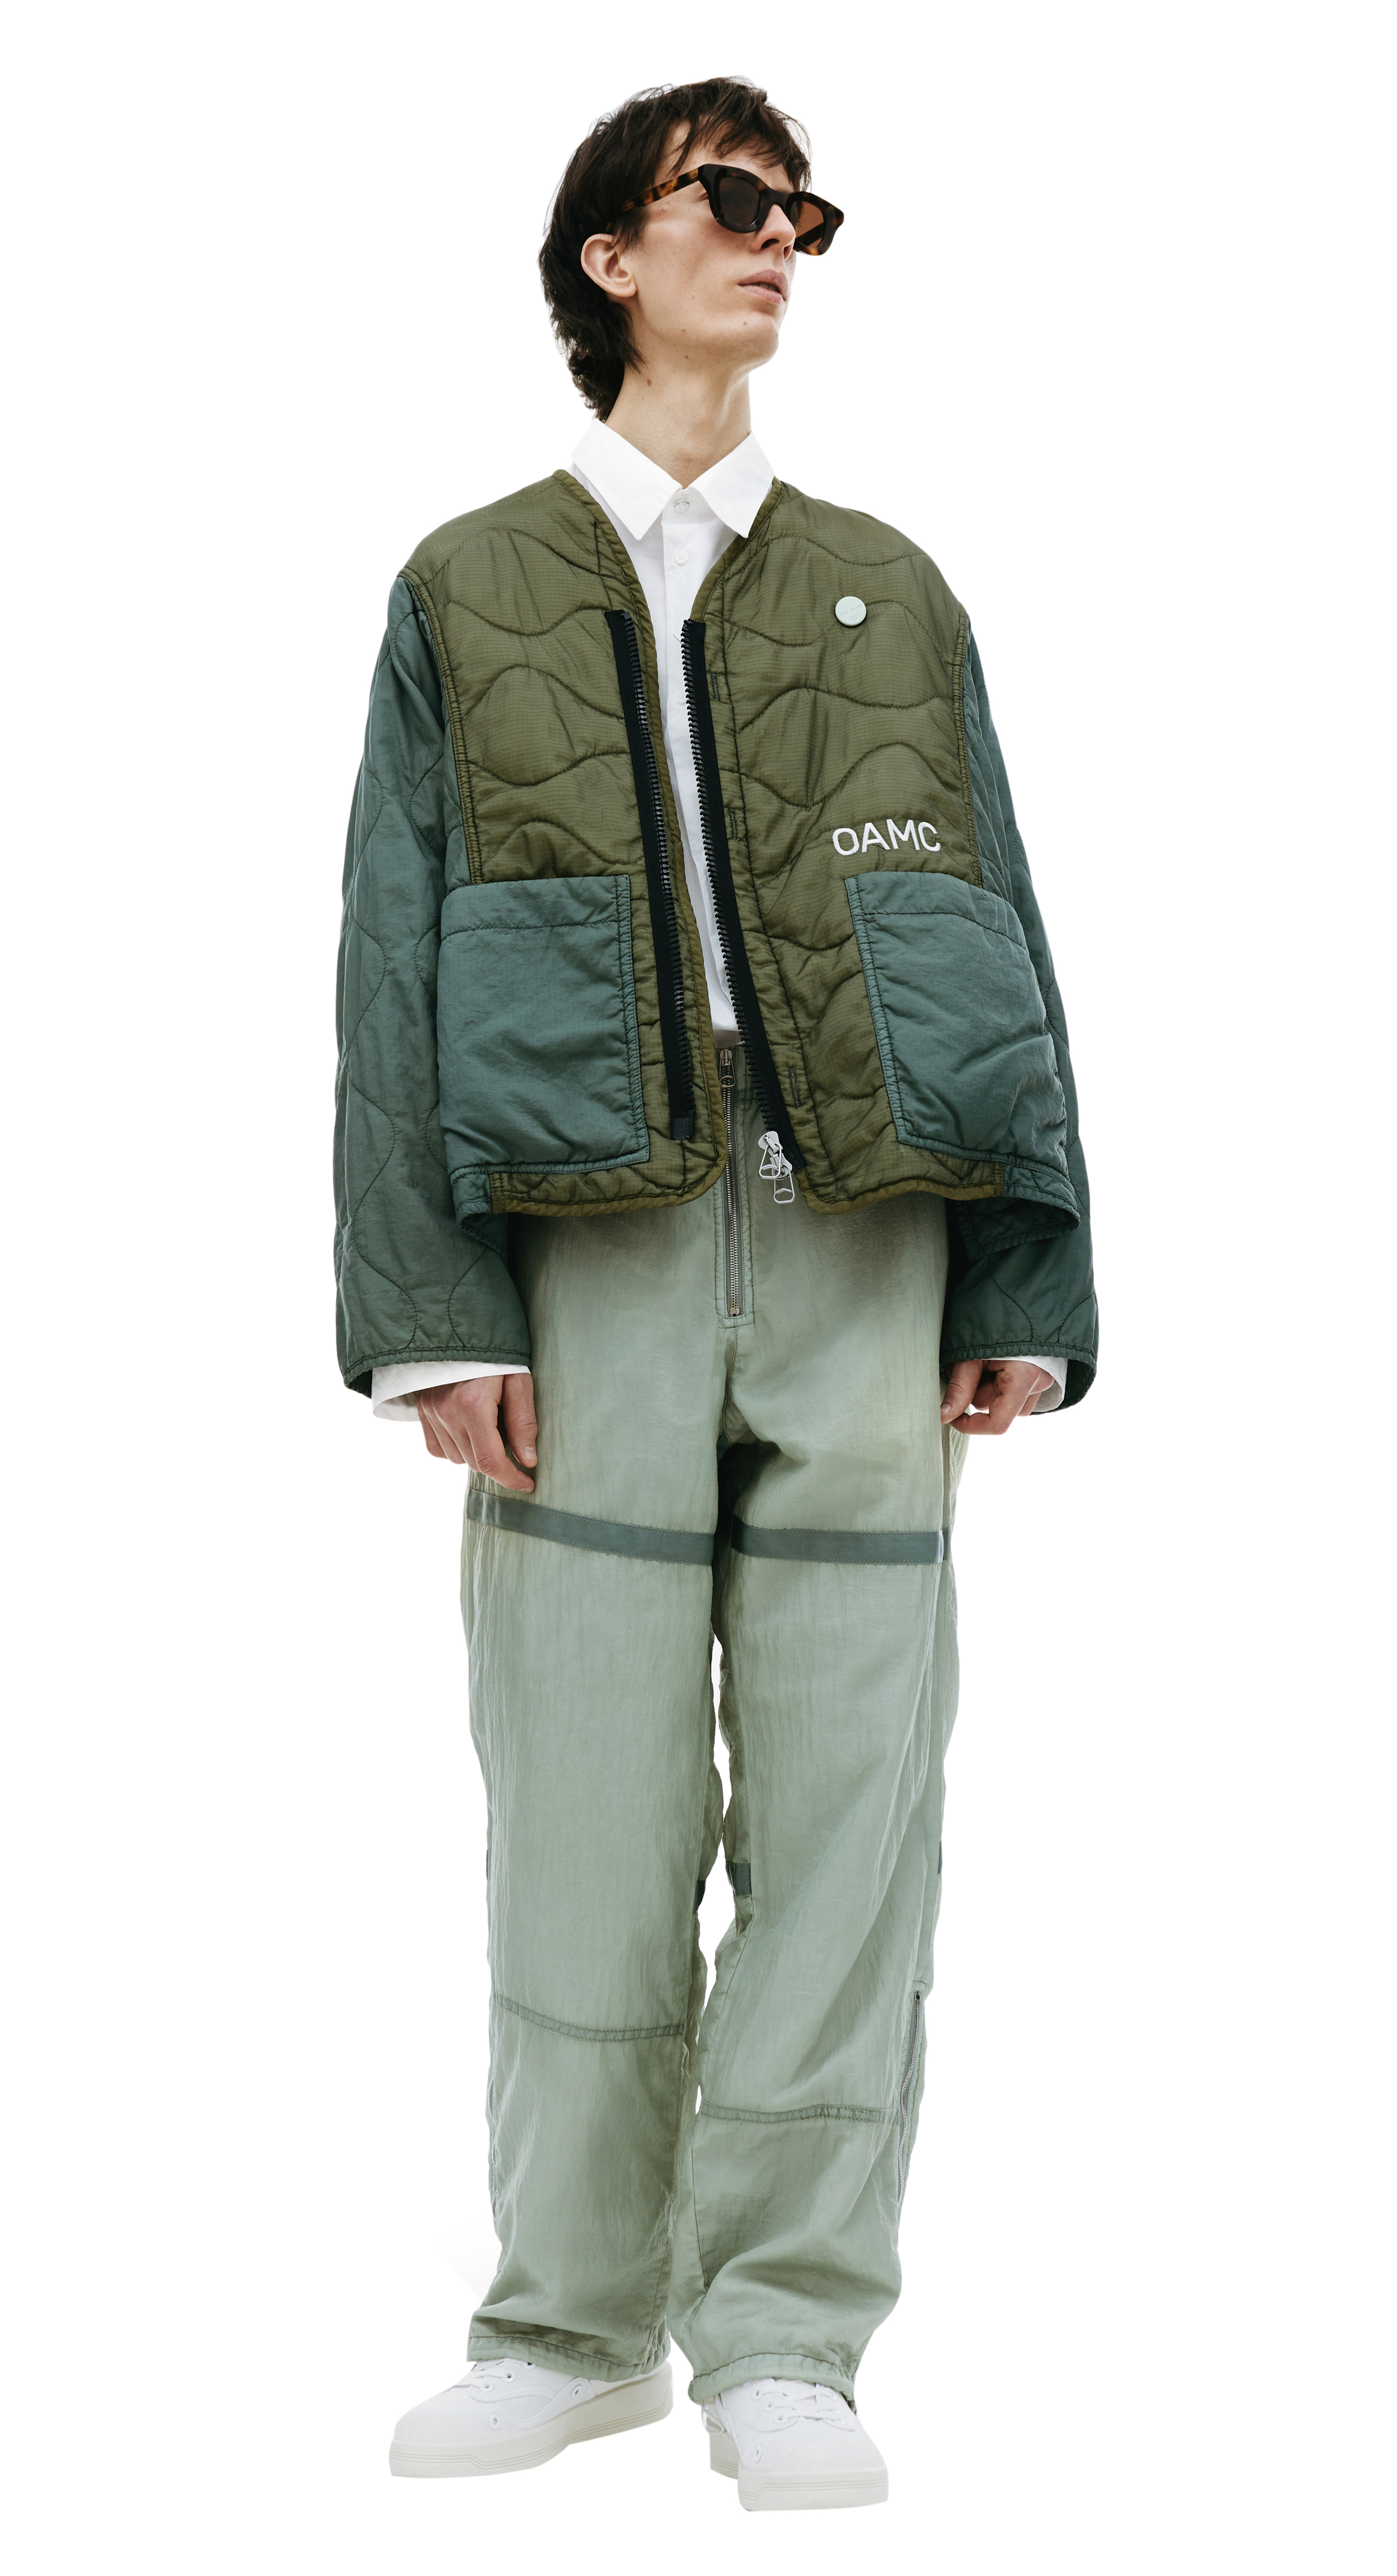 Re:Work Peacemaker quilted jacket